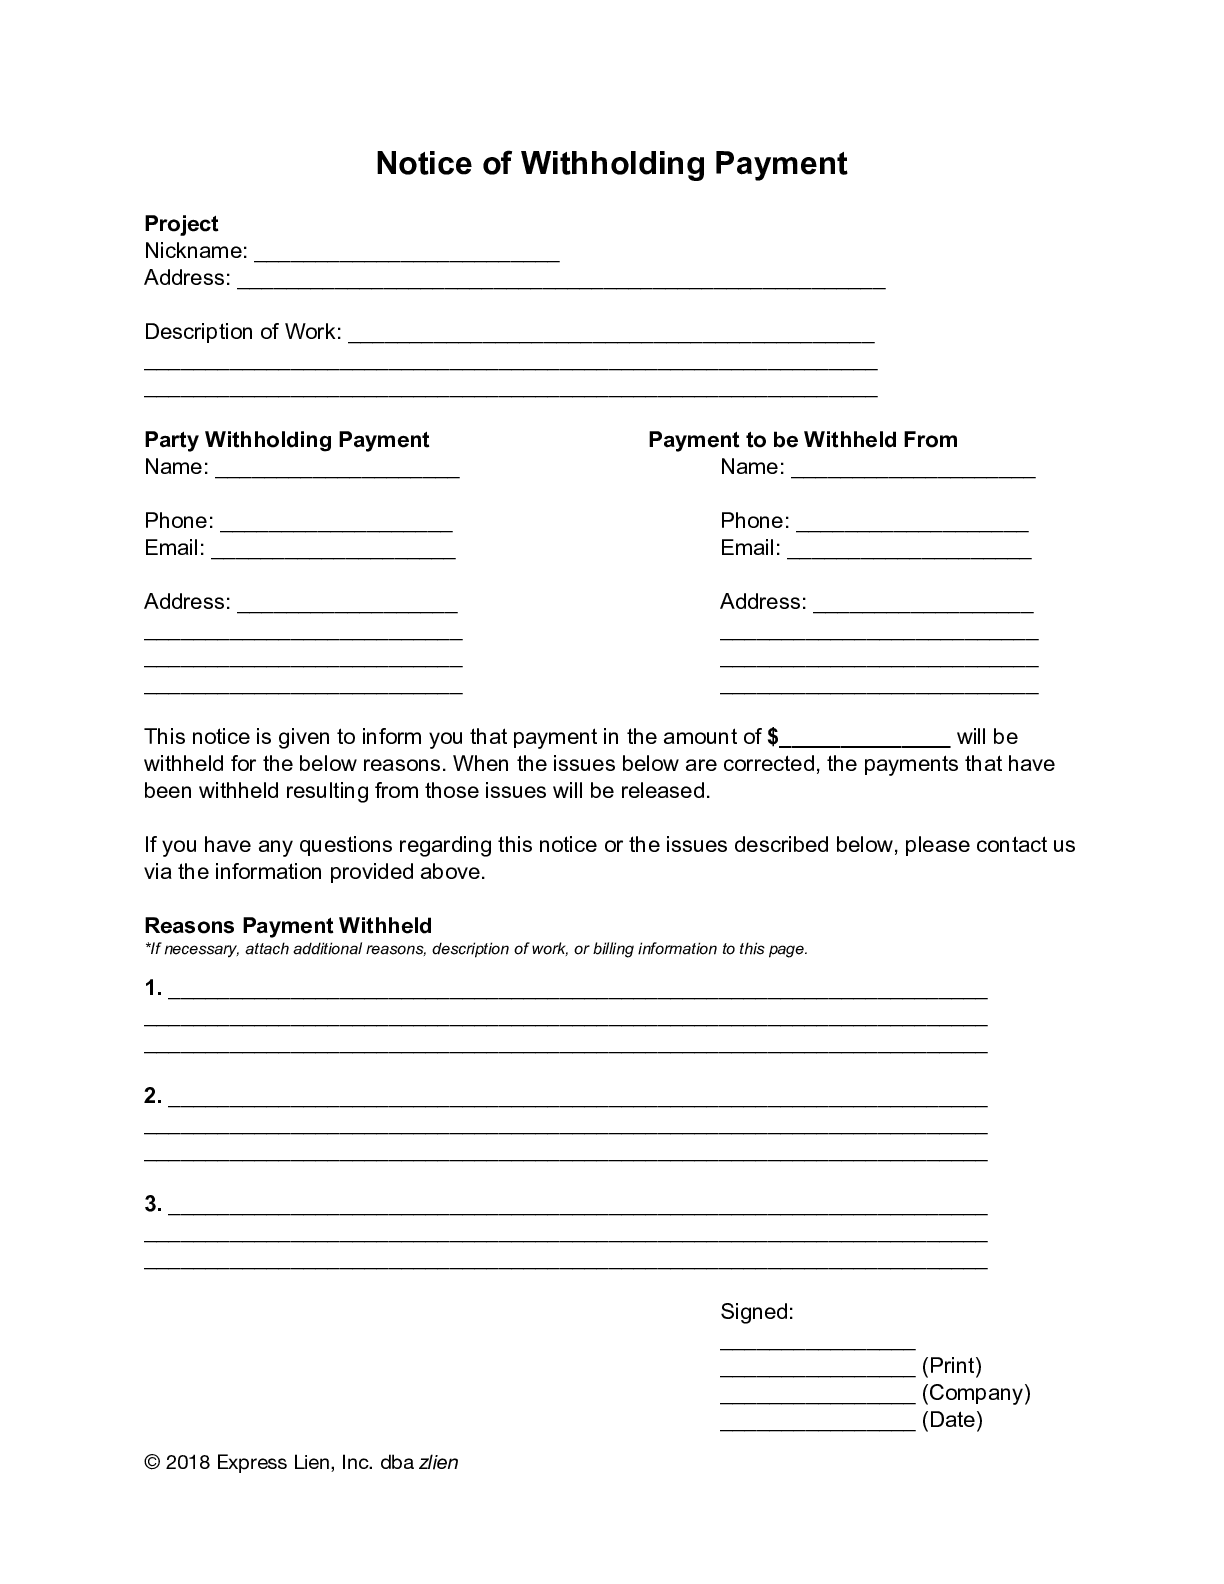 Notice of Withholding Payment Form - free from